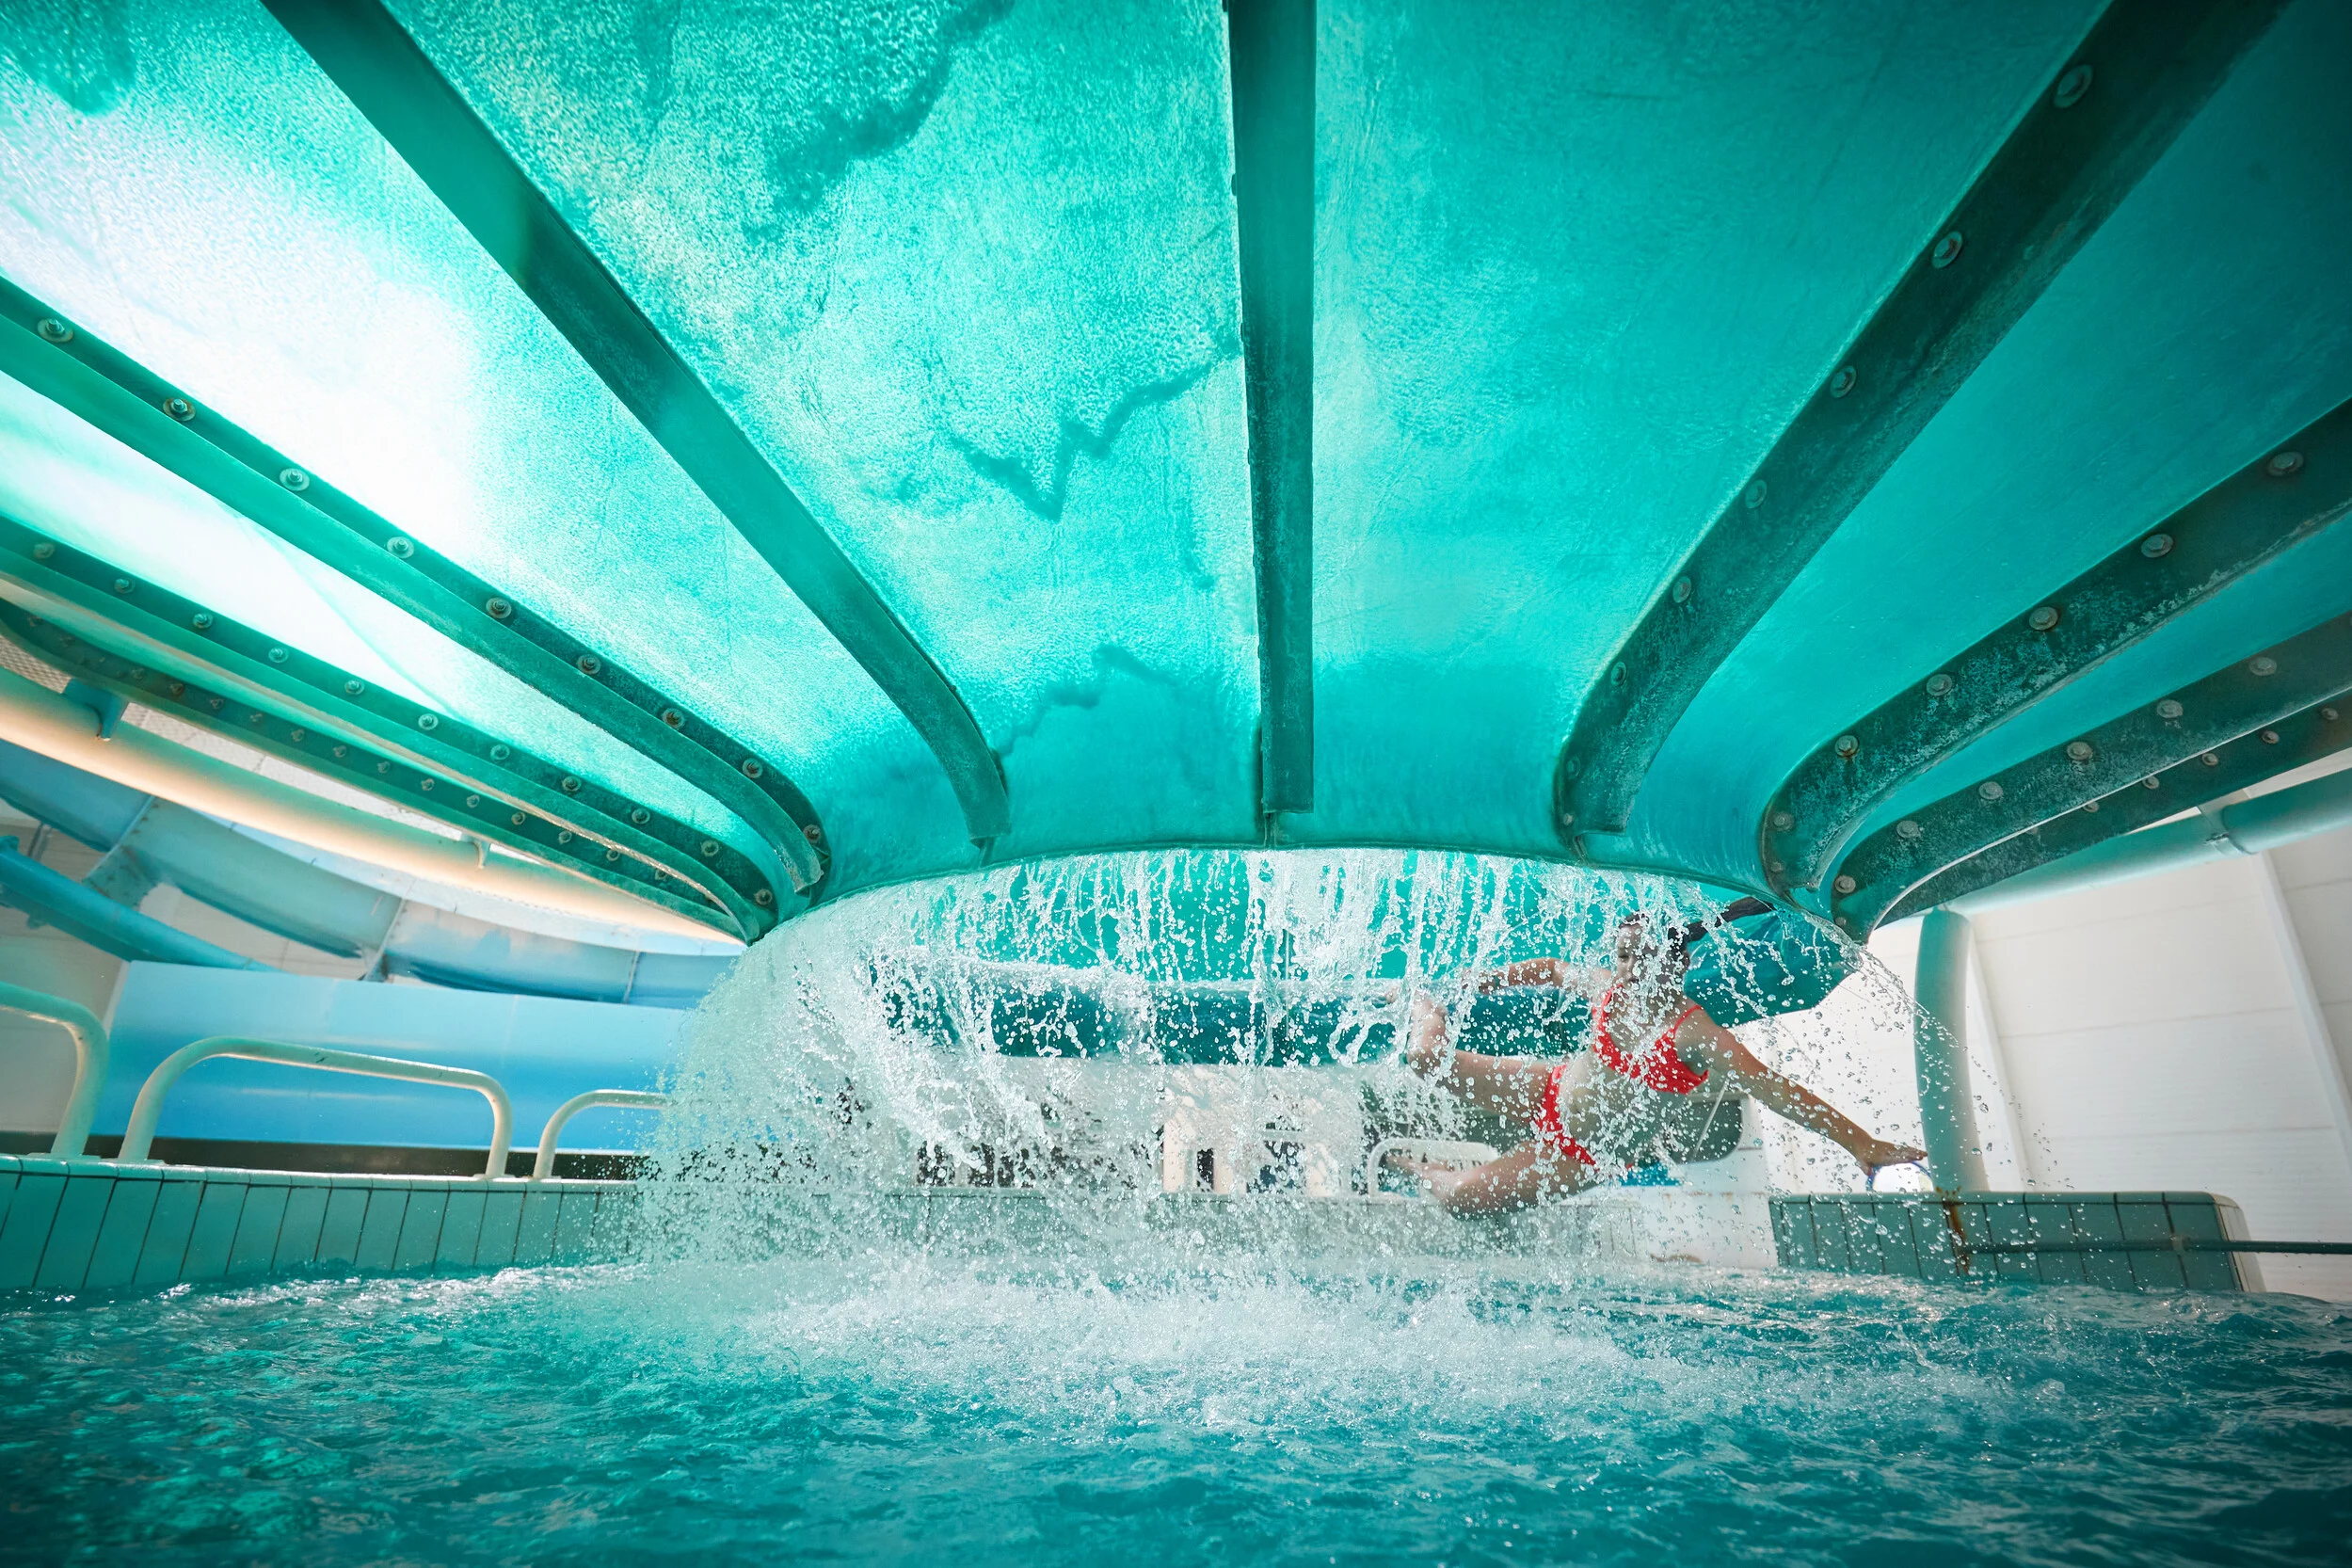 Butlin's facilities include a splash park and swimming pools